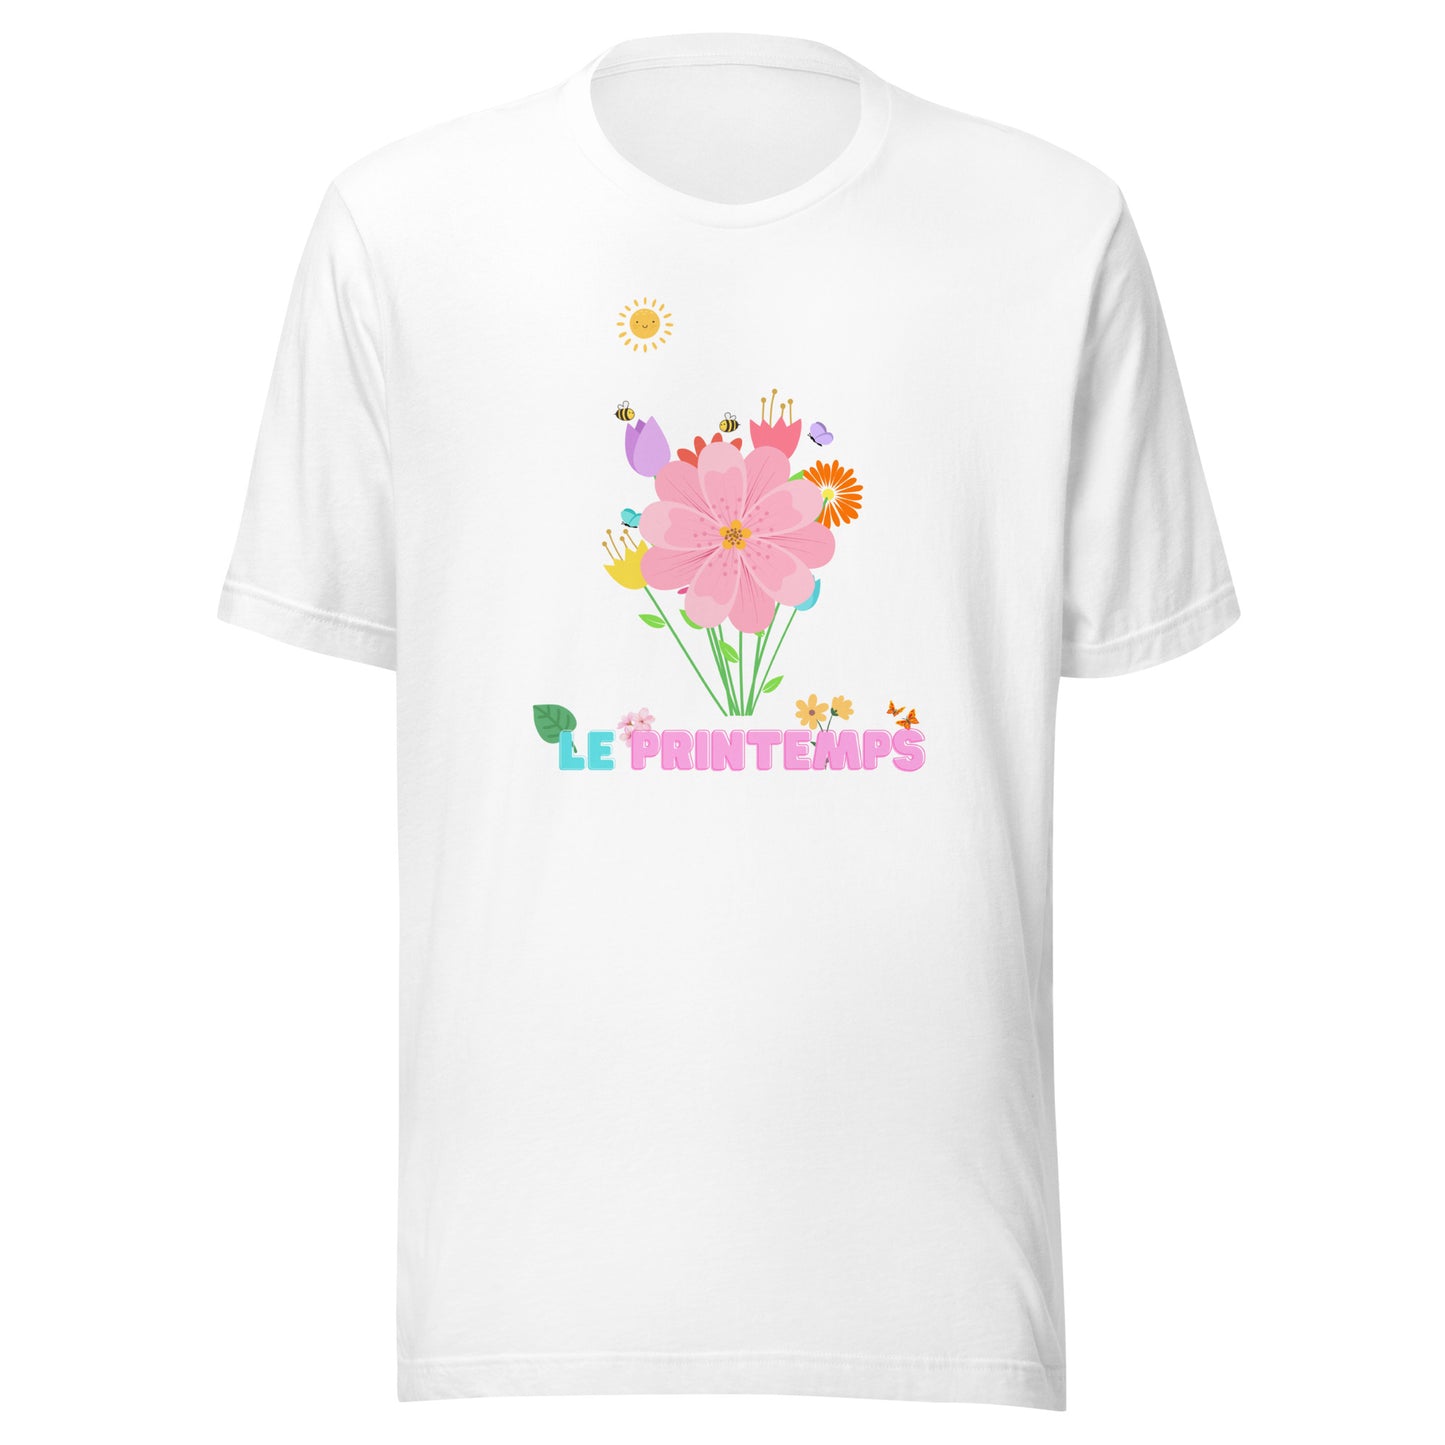 A vibrant spring season t-shirt, cool style, trendy, catchy, and colorful for men and women, unisex